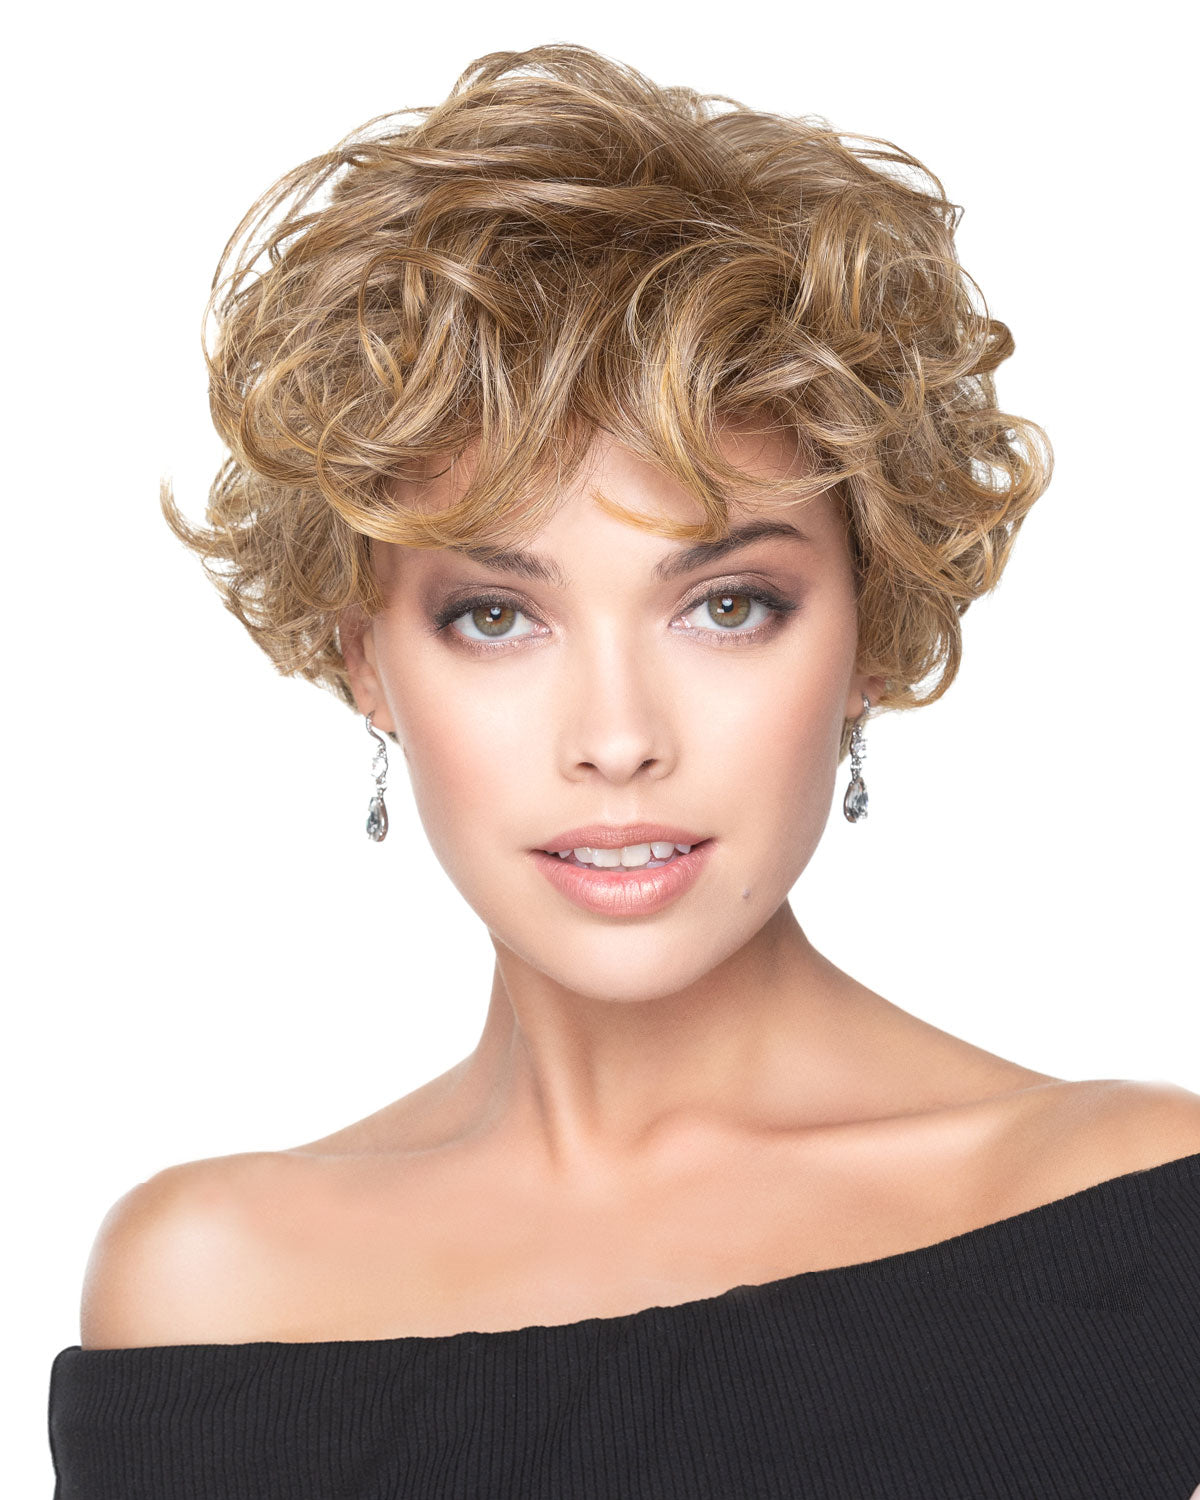 Three Trendy Short Haircuts For Curly Hair – Curl Keeper